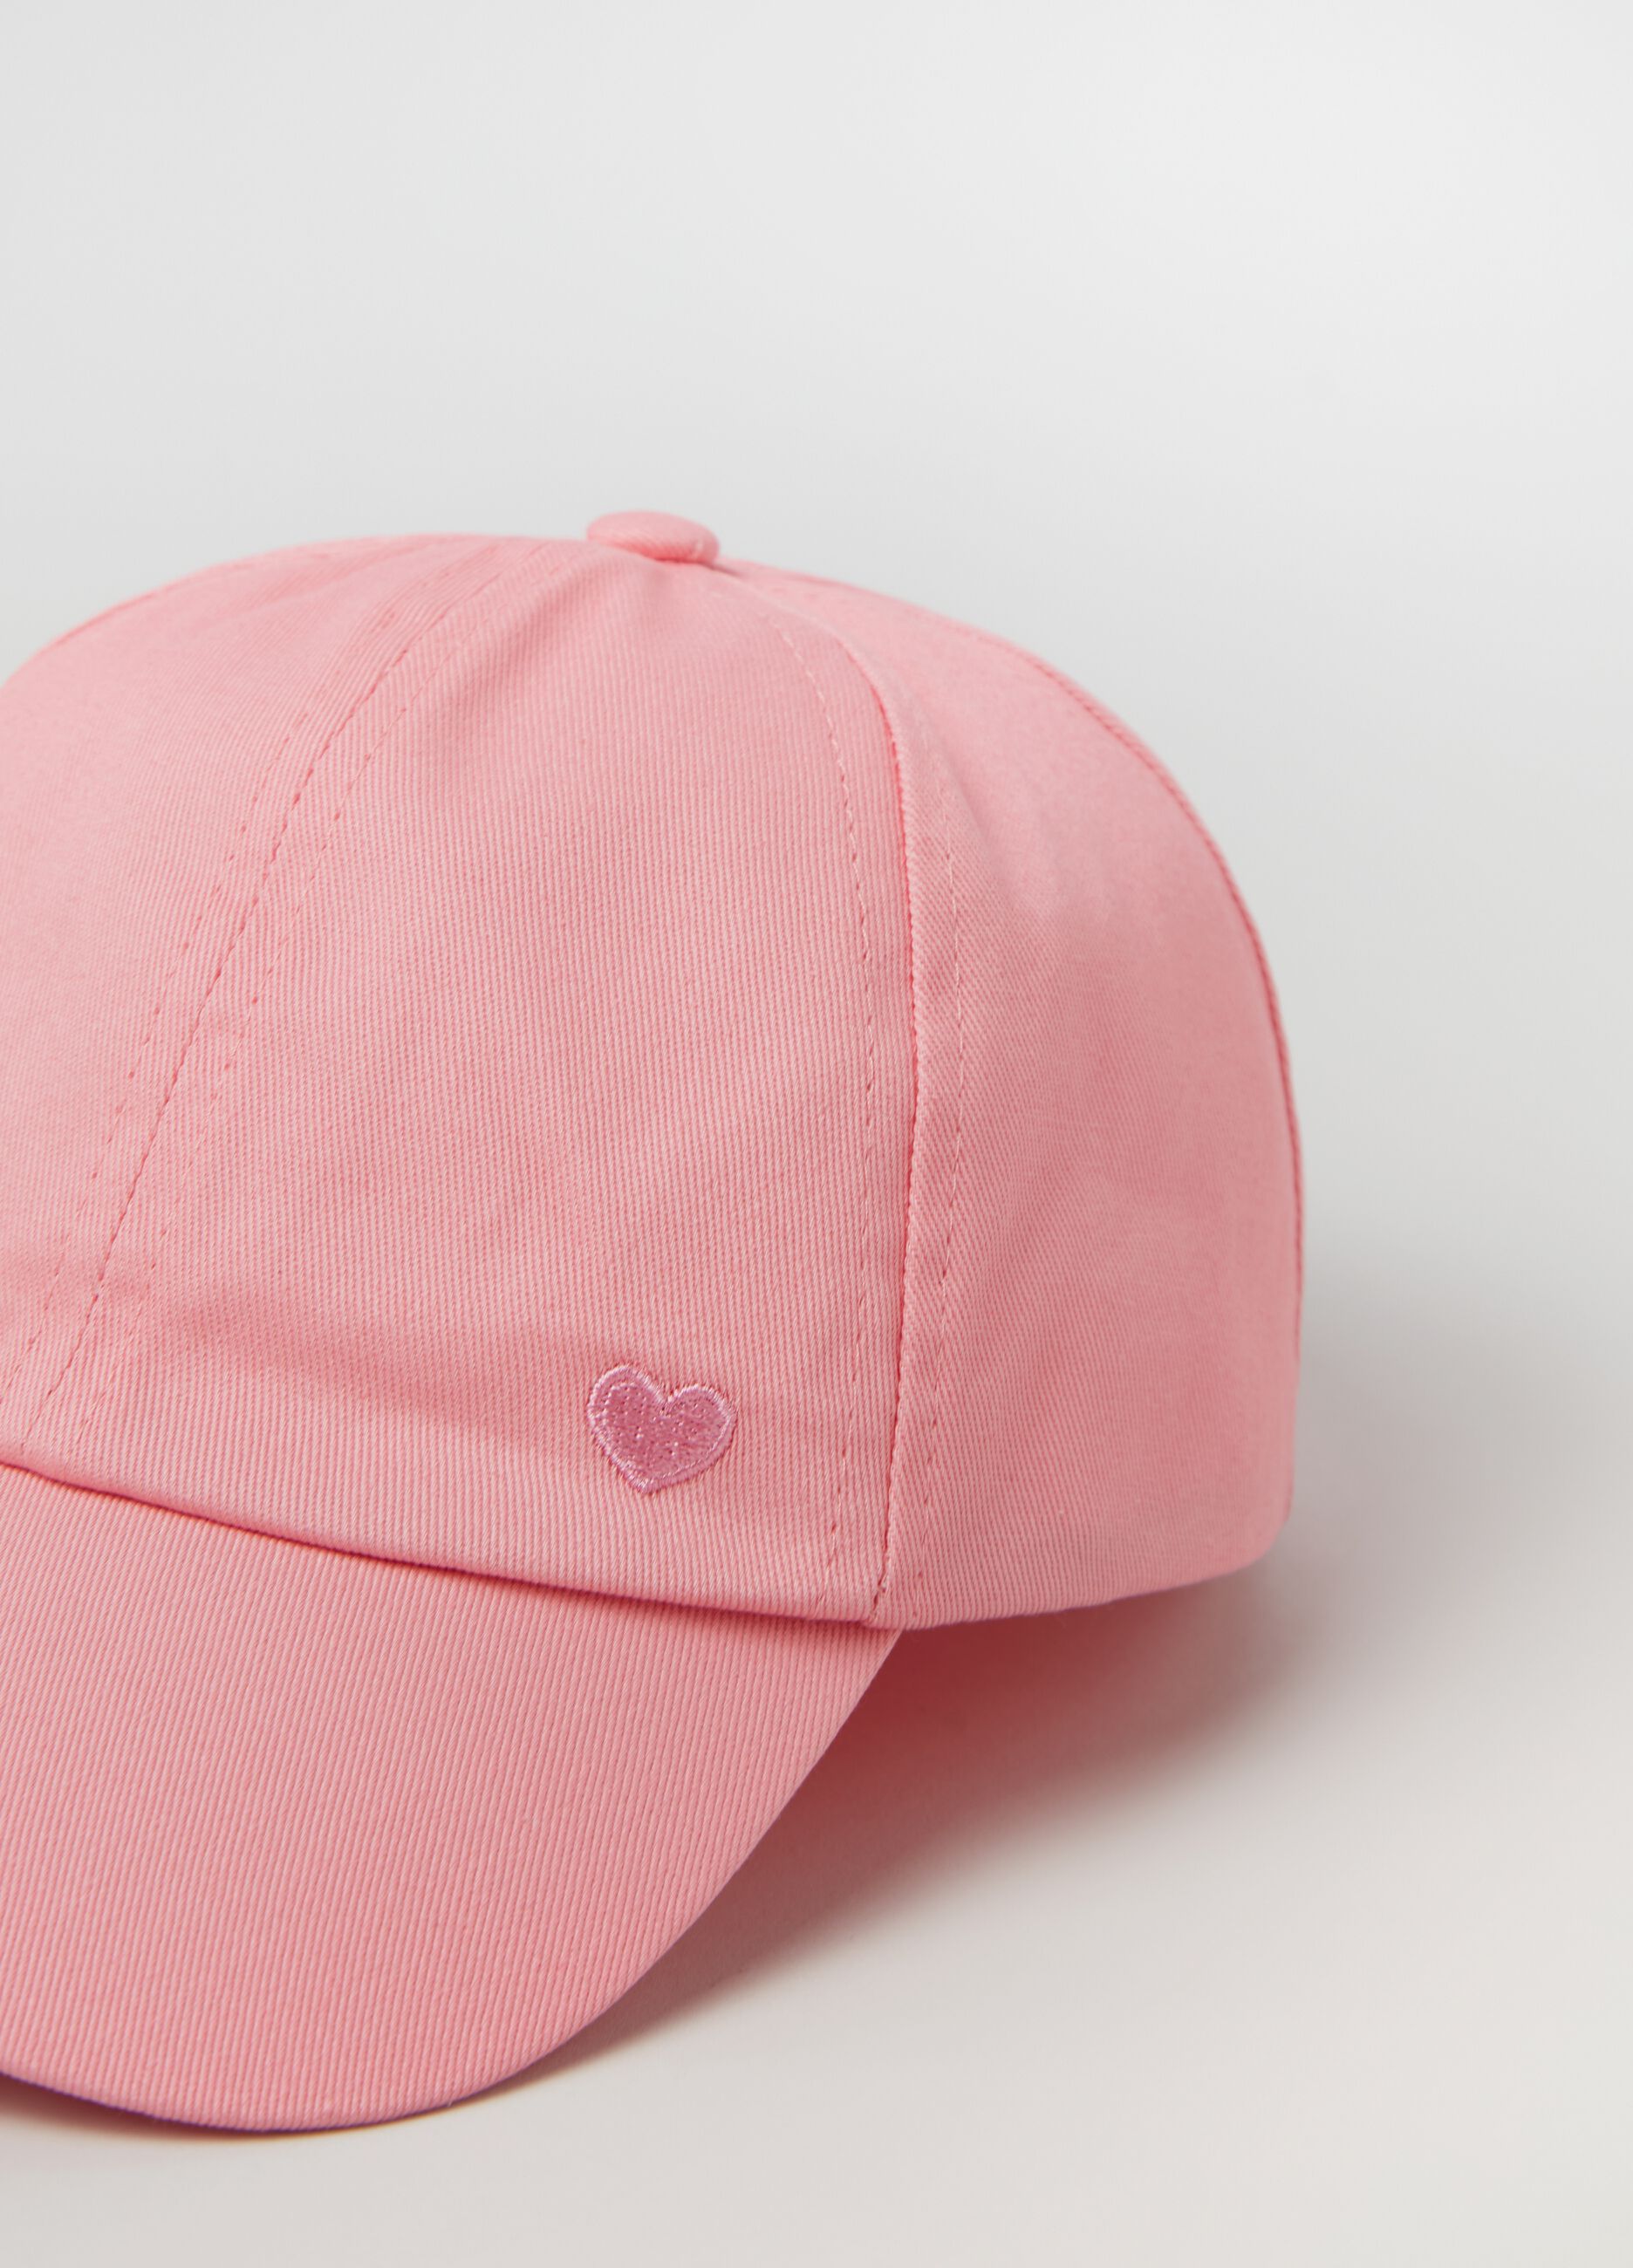 Baseball cap with small heart embroidery